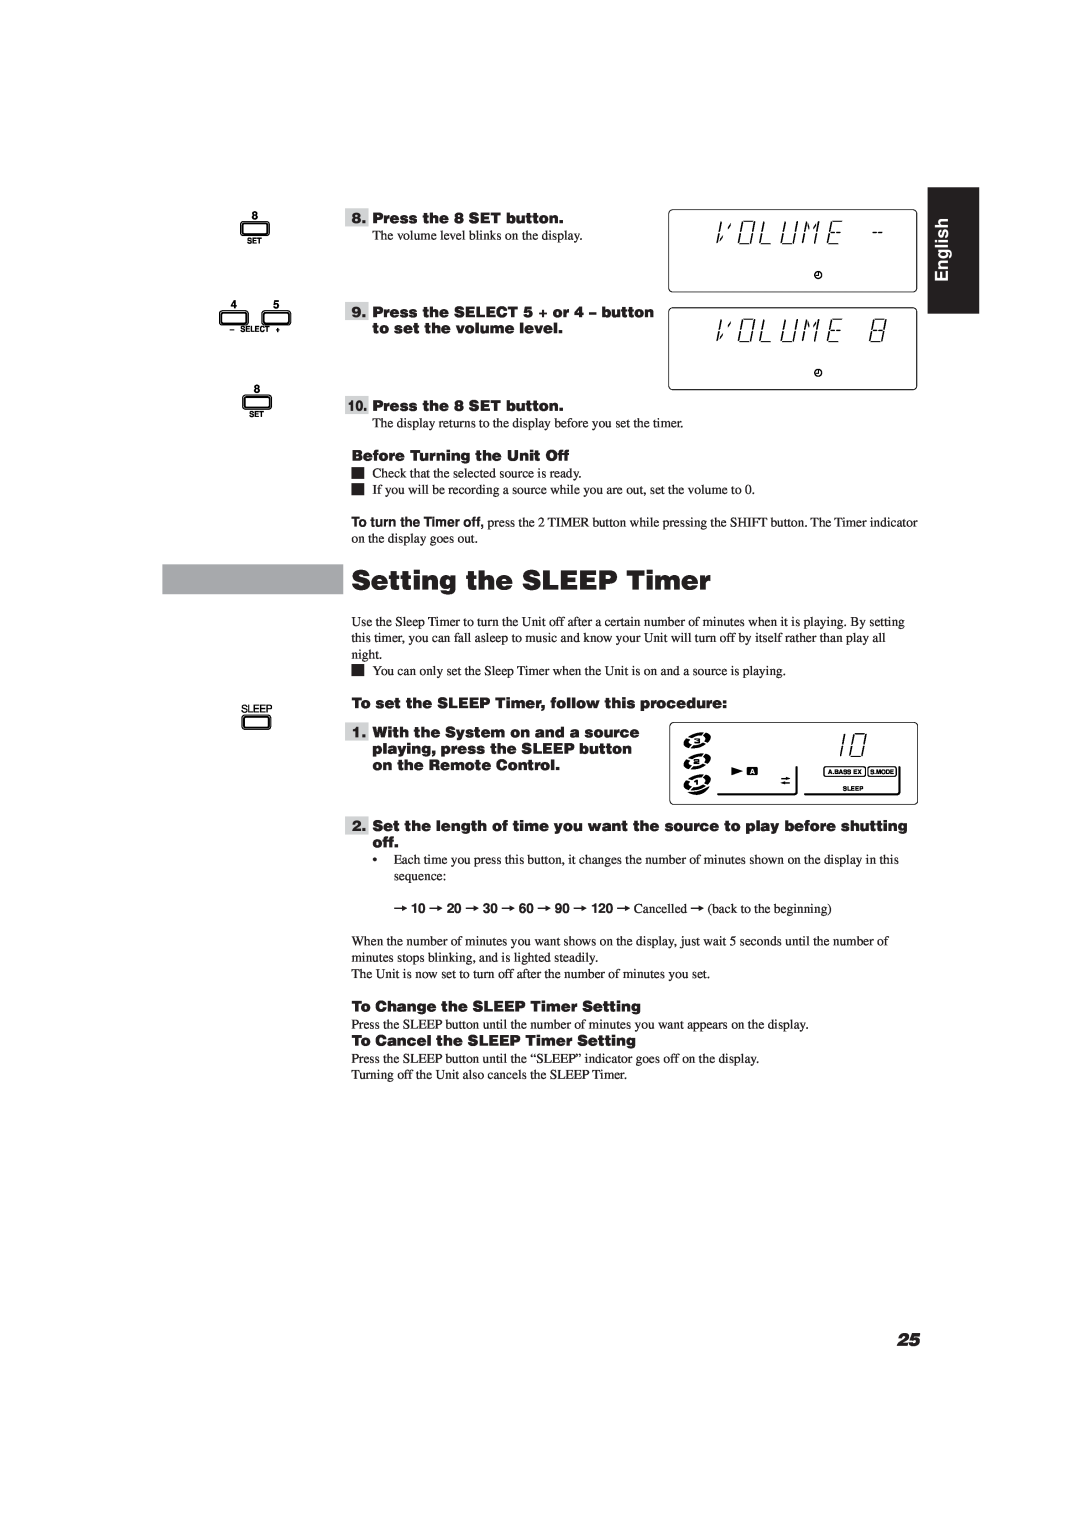 JVC CA-D501T, MX-D401T, MX-D301T manual Setting the SLEEP Timer, English, Press the 8 SET button, Before Turning the Unit Off 